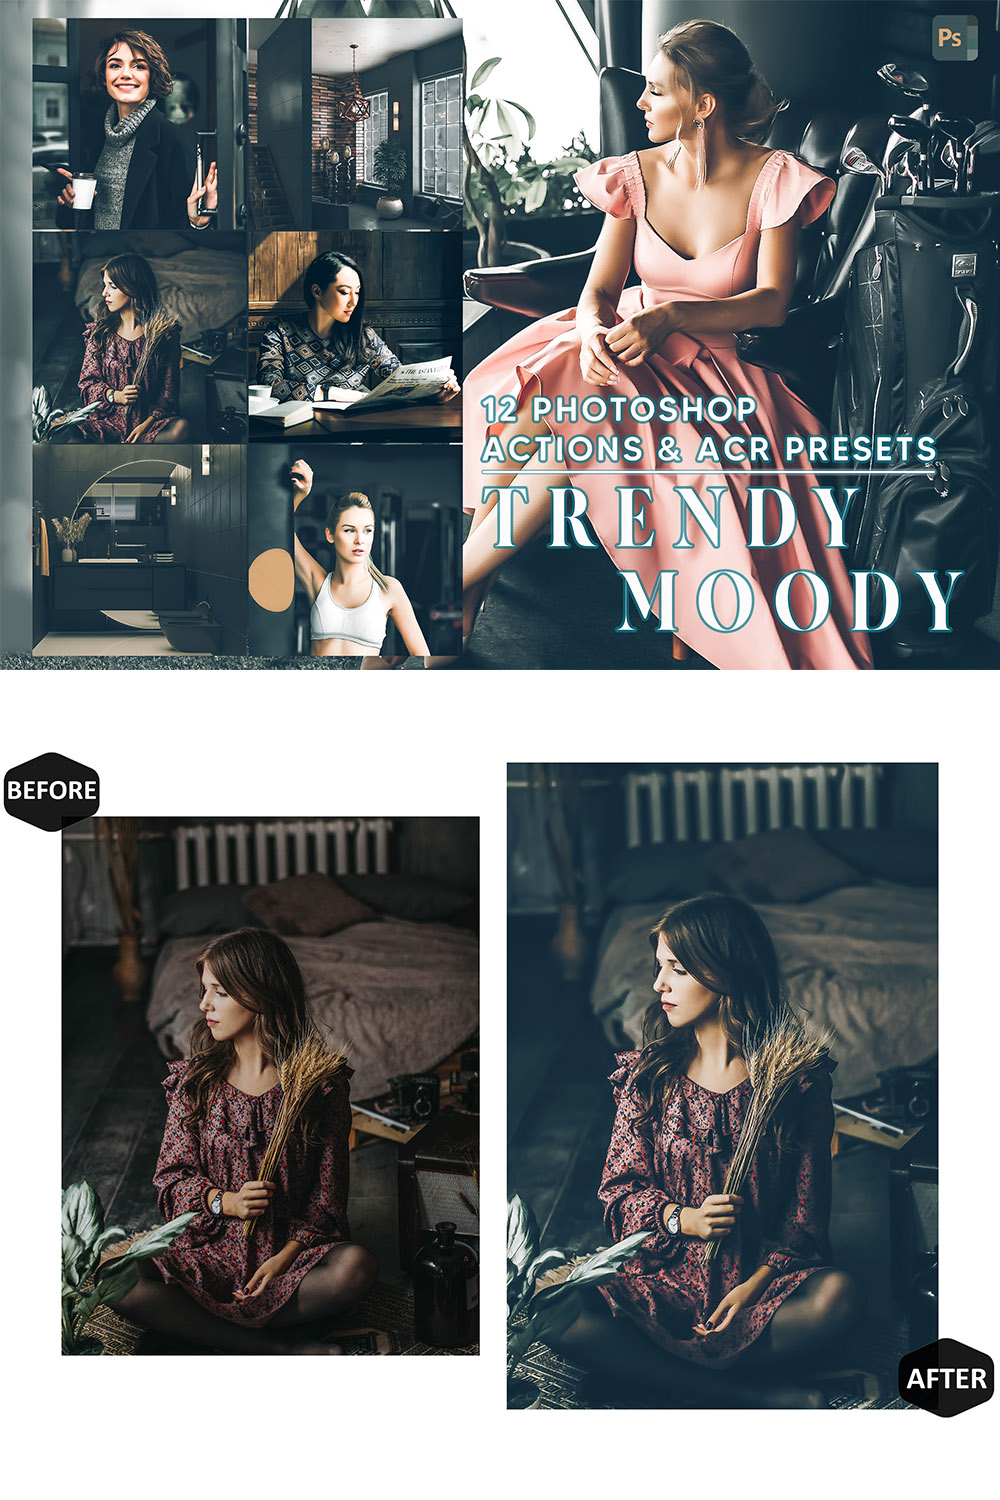 12 Photoshop Actions, Trendy Moody Ps Action, Matte Airy ACR Preset, Skin Warm Ps Filter, Portrait And Lifestyle Theme For Instagram, Blogger pinterest preview image.